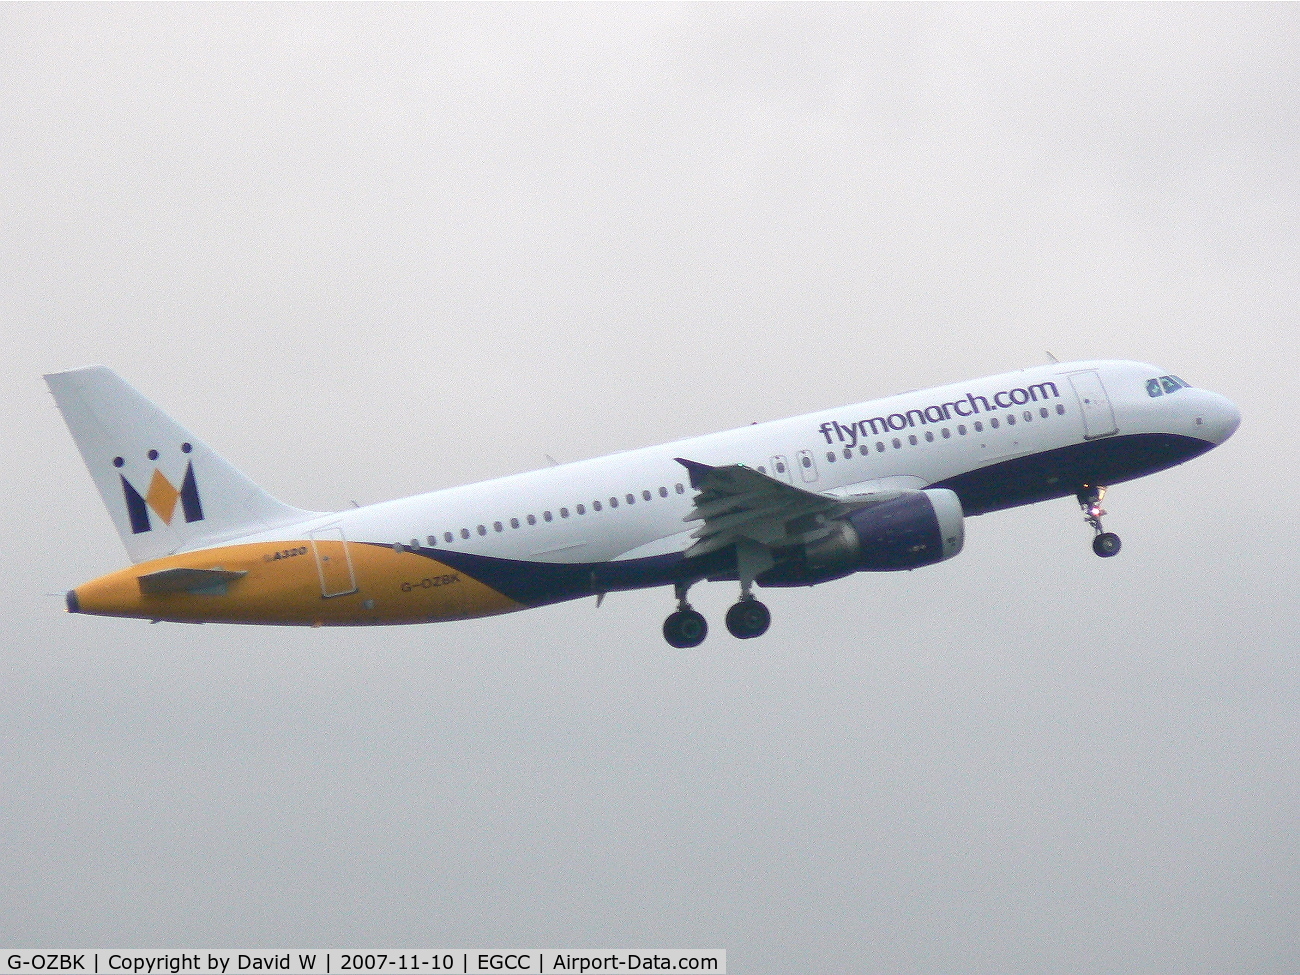 G-OZBK, 2000 Airbus A320-214 C/N 1370, Taking off from Manchester.